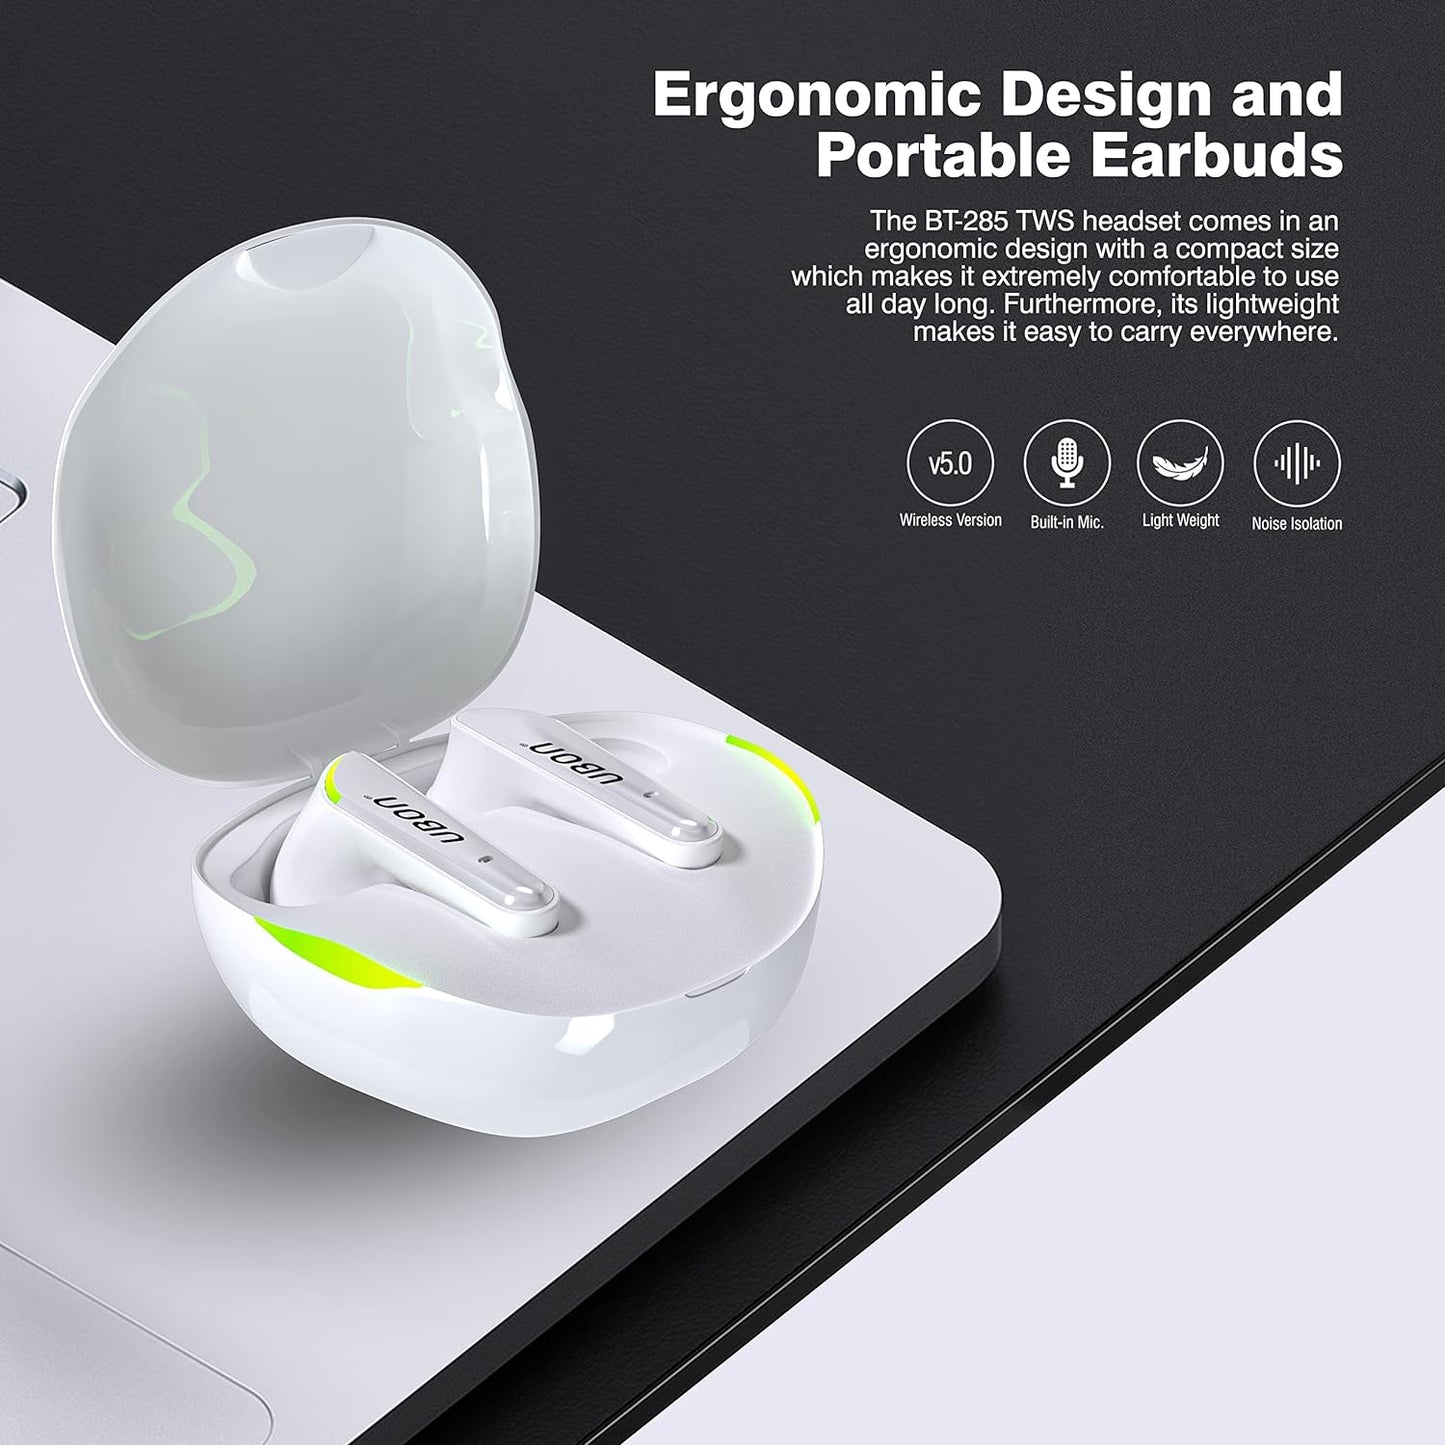 UBON Wireless Earbuds Bluetooth On Ear Headphones Air Shark BT-285, v5.0 Bluetooth Earphone with TWS Function, Up to 20 Hours Playtime, Type-C Fast Charging, Touch Controls & Noise Isolation